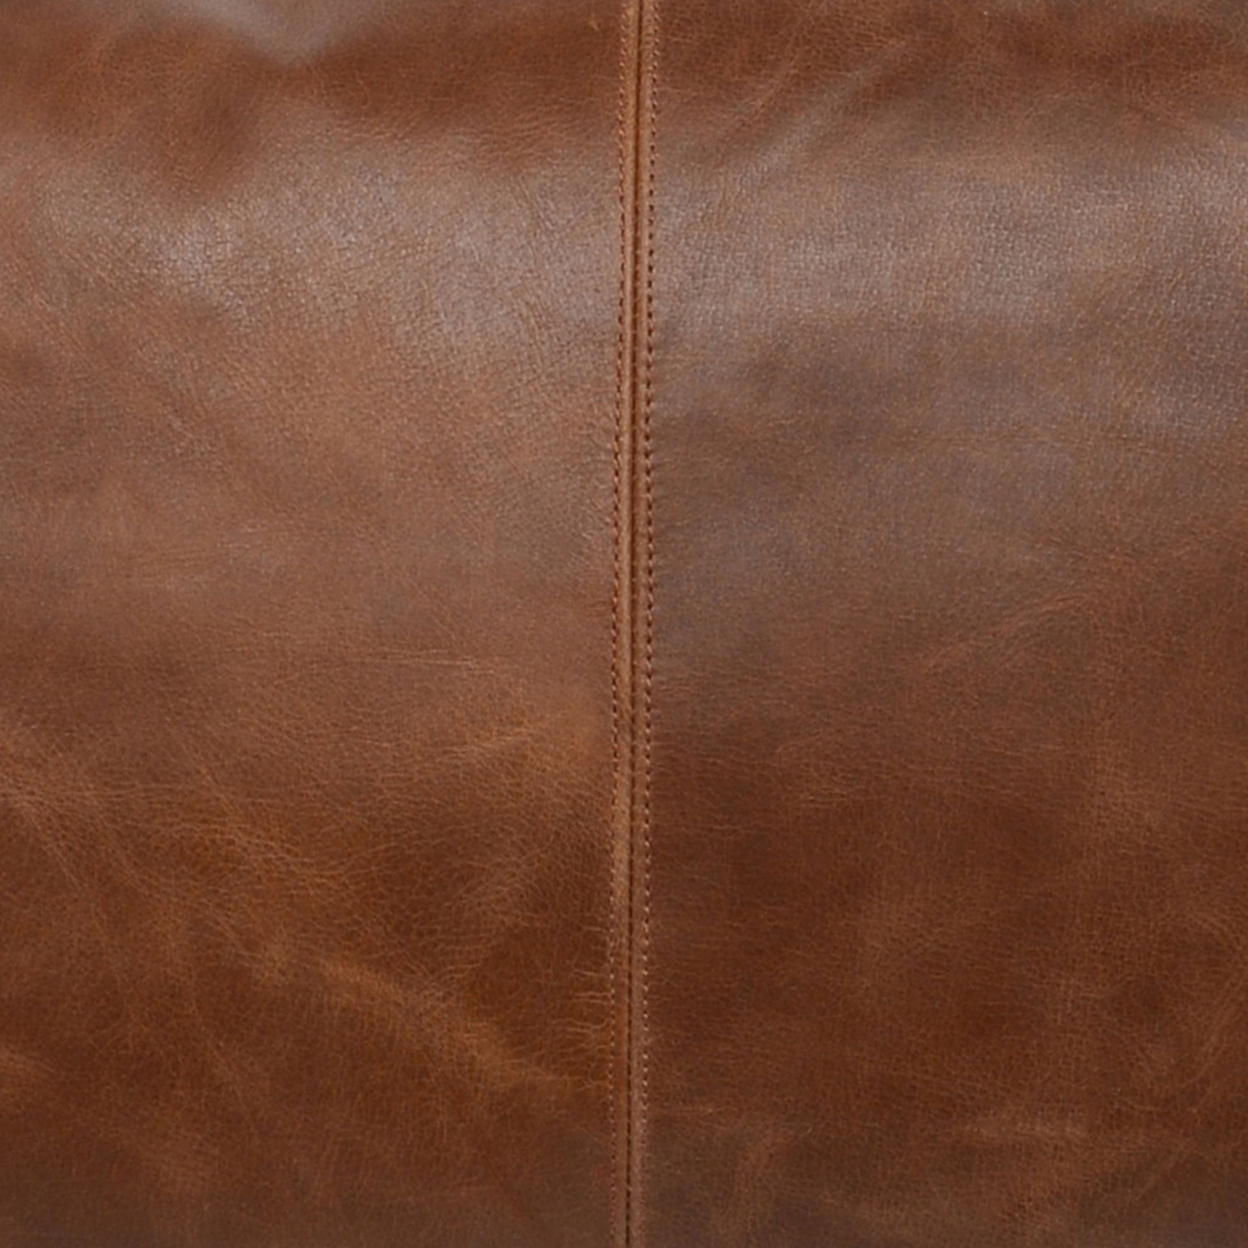 Leatherette Throw Pillow With Stitched Details And Flanged Edges, Brown- Saltoro Sherpi